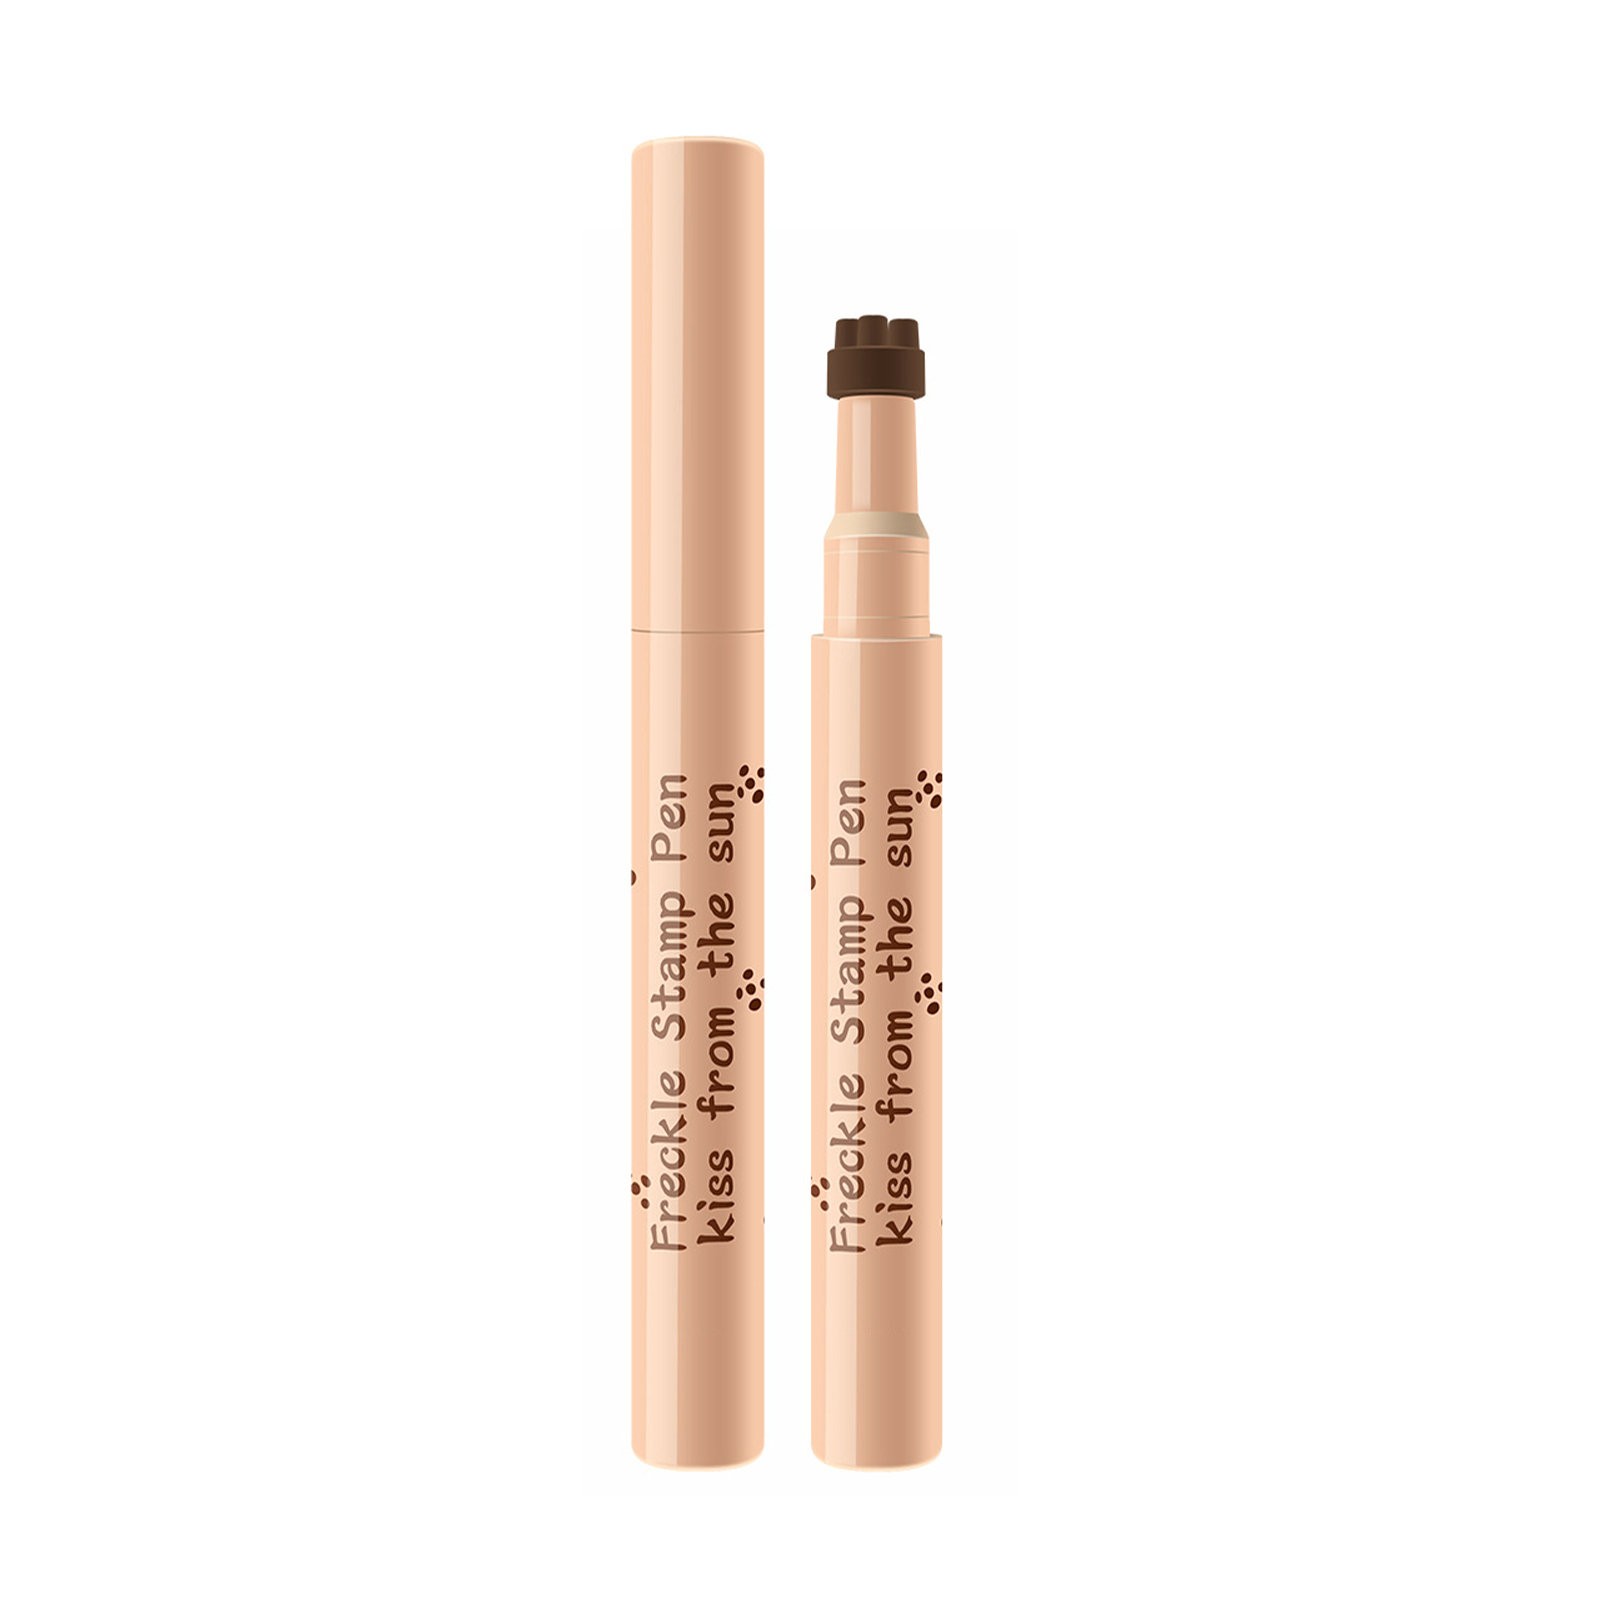 Worpbope Freckle Pen 4 Colors Long Lasting Small Natural Like Face ...